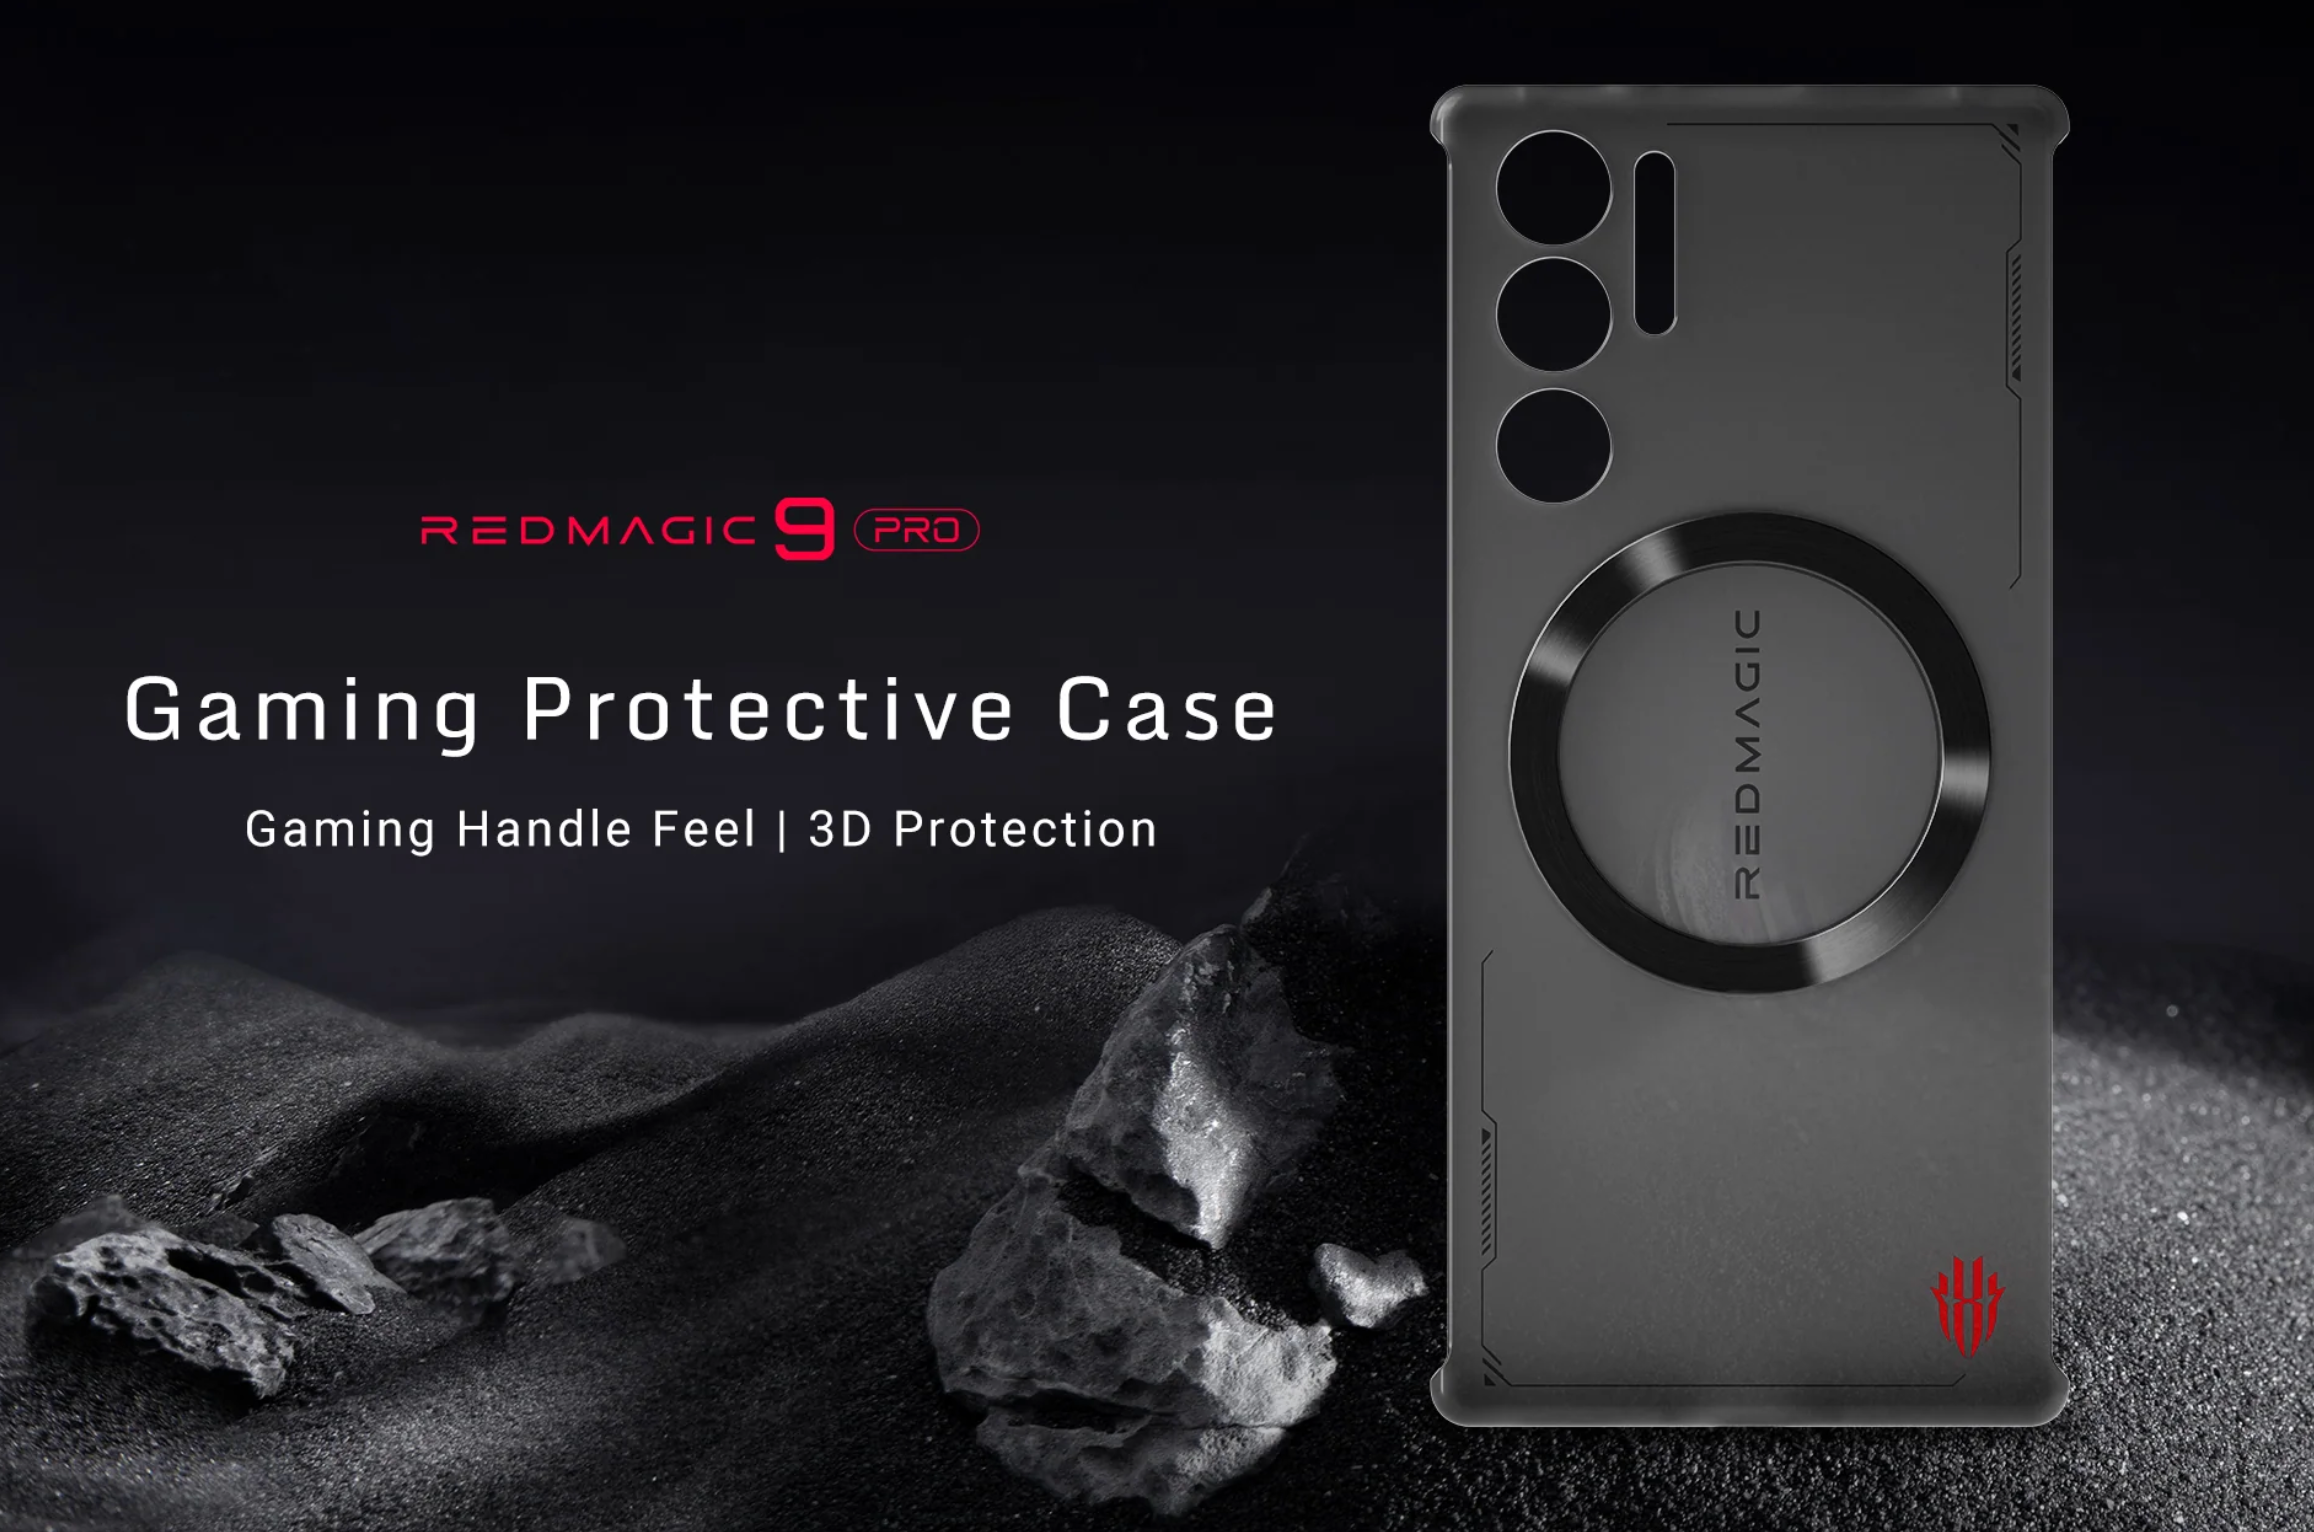 The RedMagic 9 Pro makes a chilling debut for $649